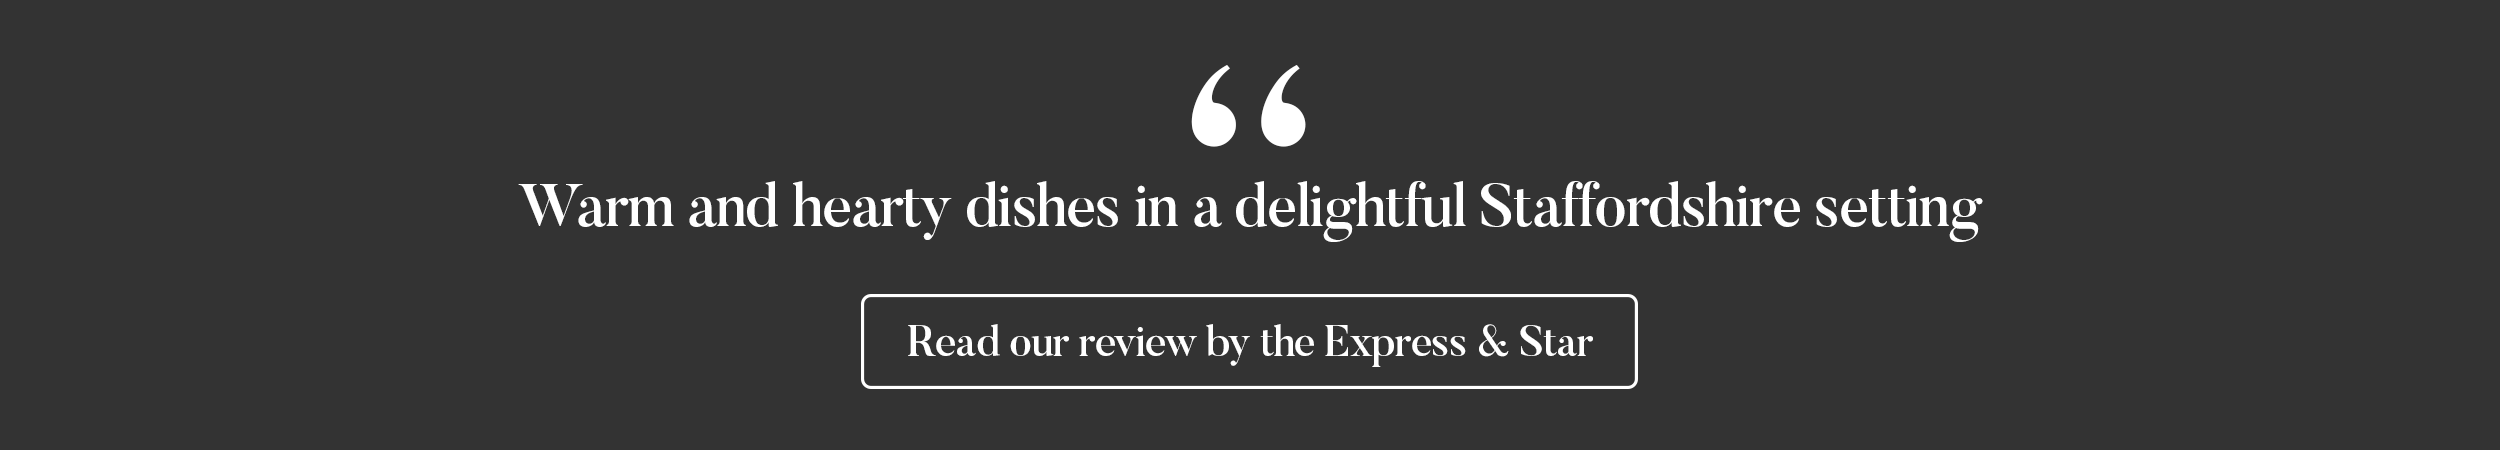 Express and Star Review